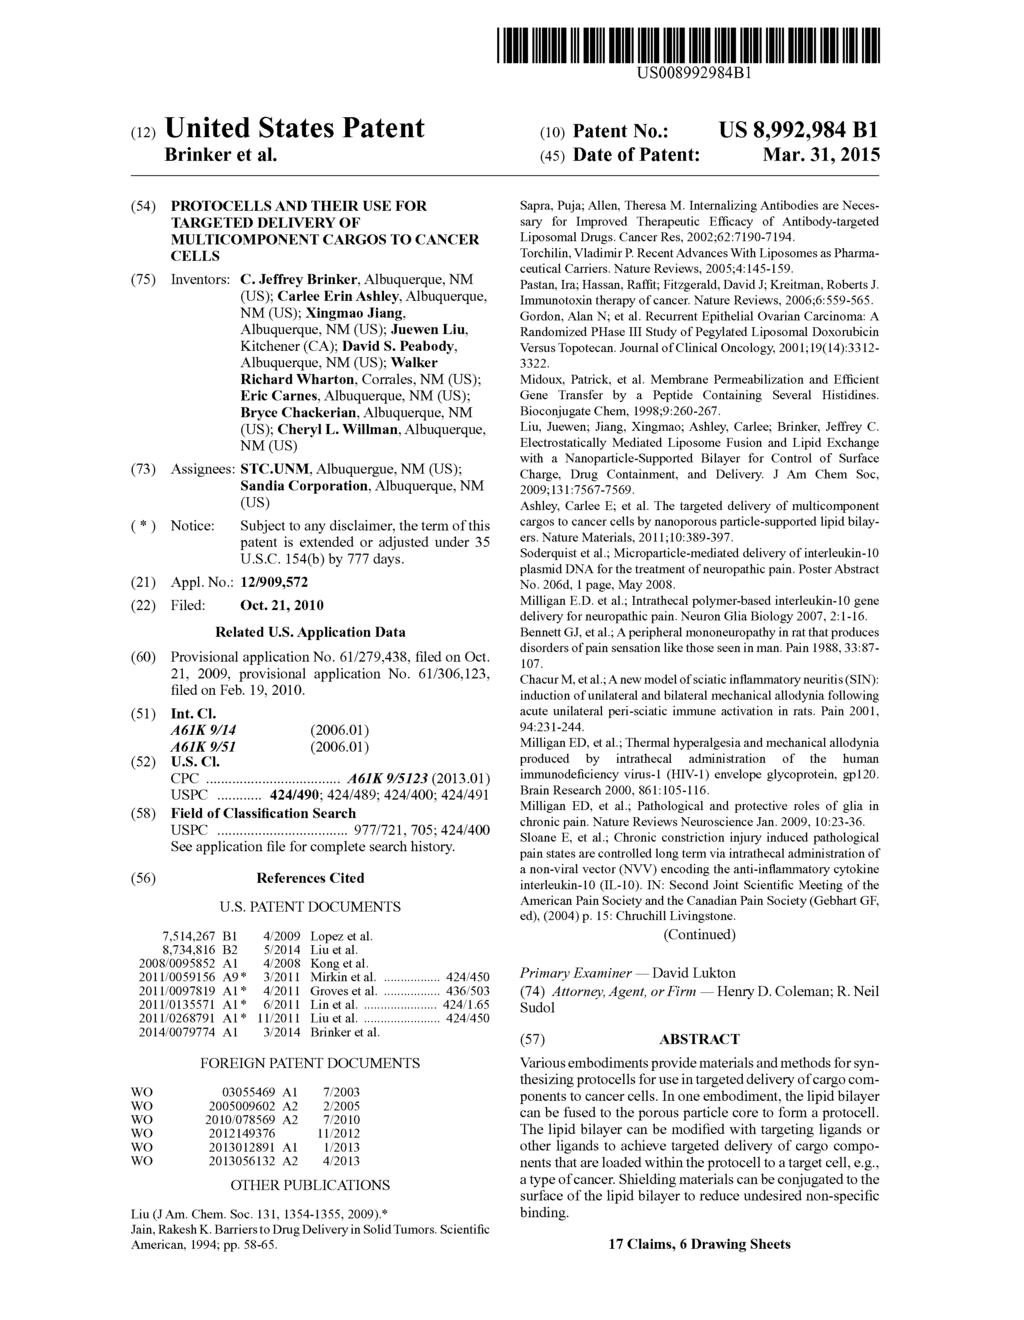 US008992.984B1 (12) United States Patent Brinker et al. (54) PROTOCELLS AND THEIR USE FOR TARGETED DELVERY OF MULTICOMPONENT CARGOS TO CANCER CELLS (75) Inventors: C.